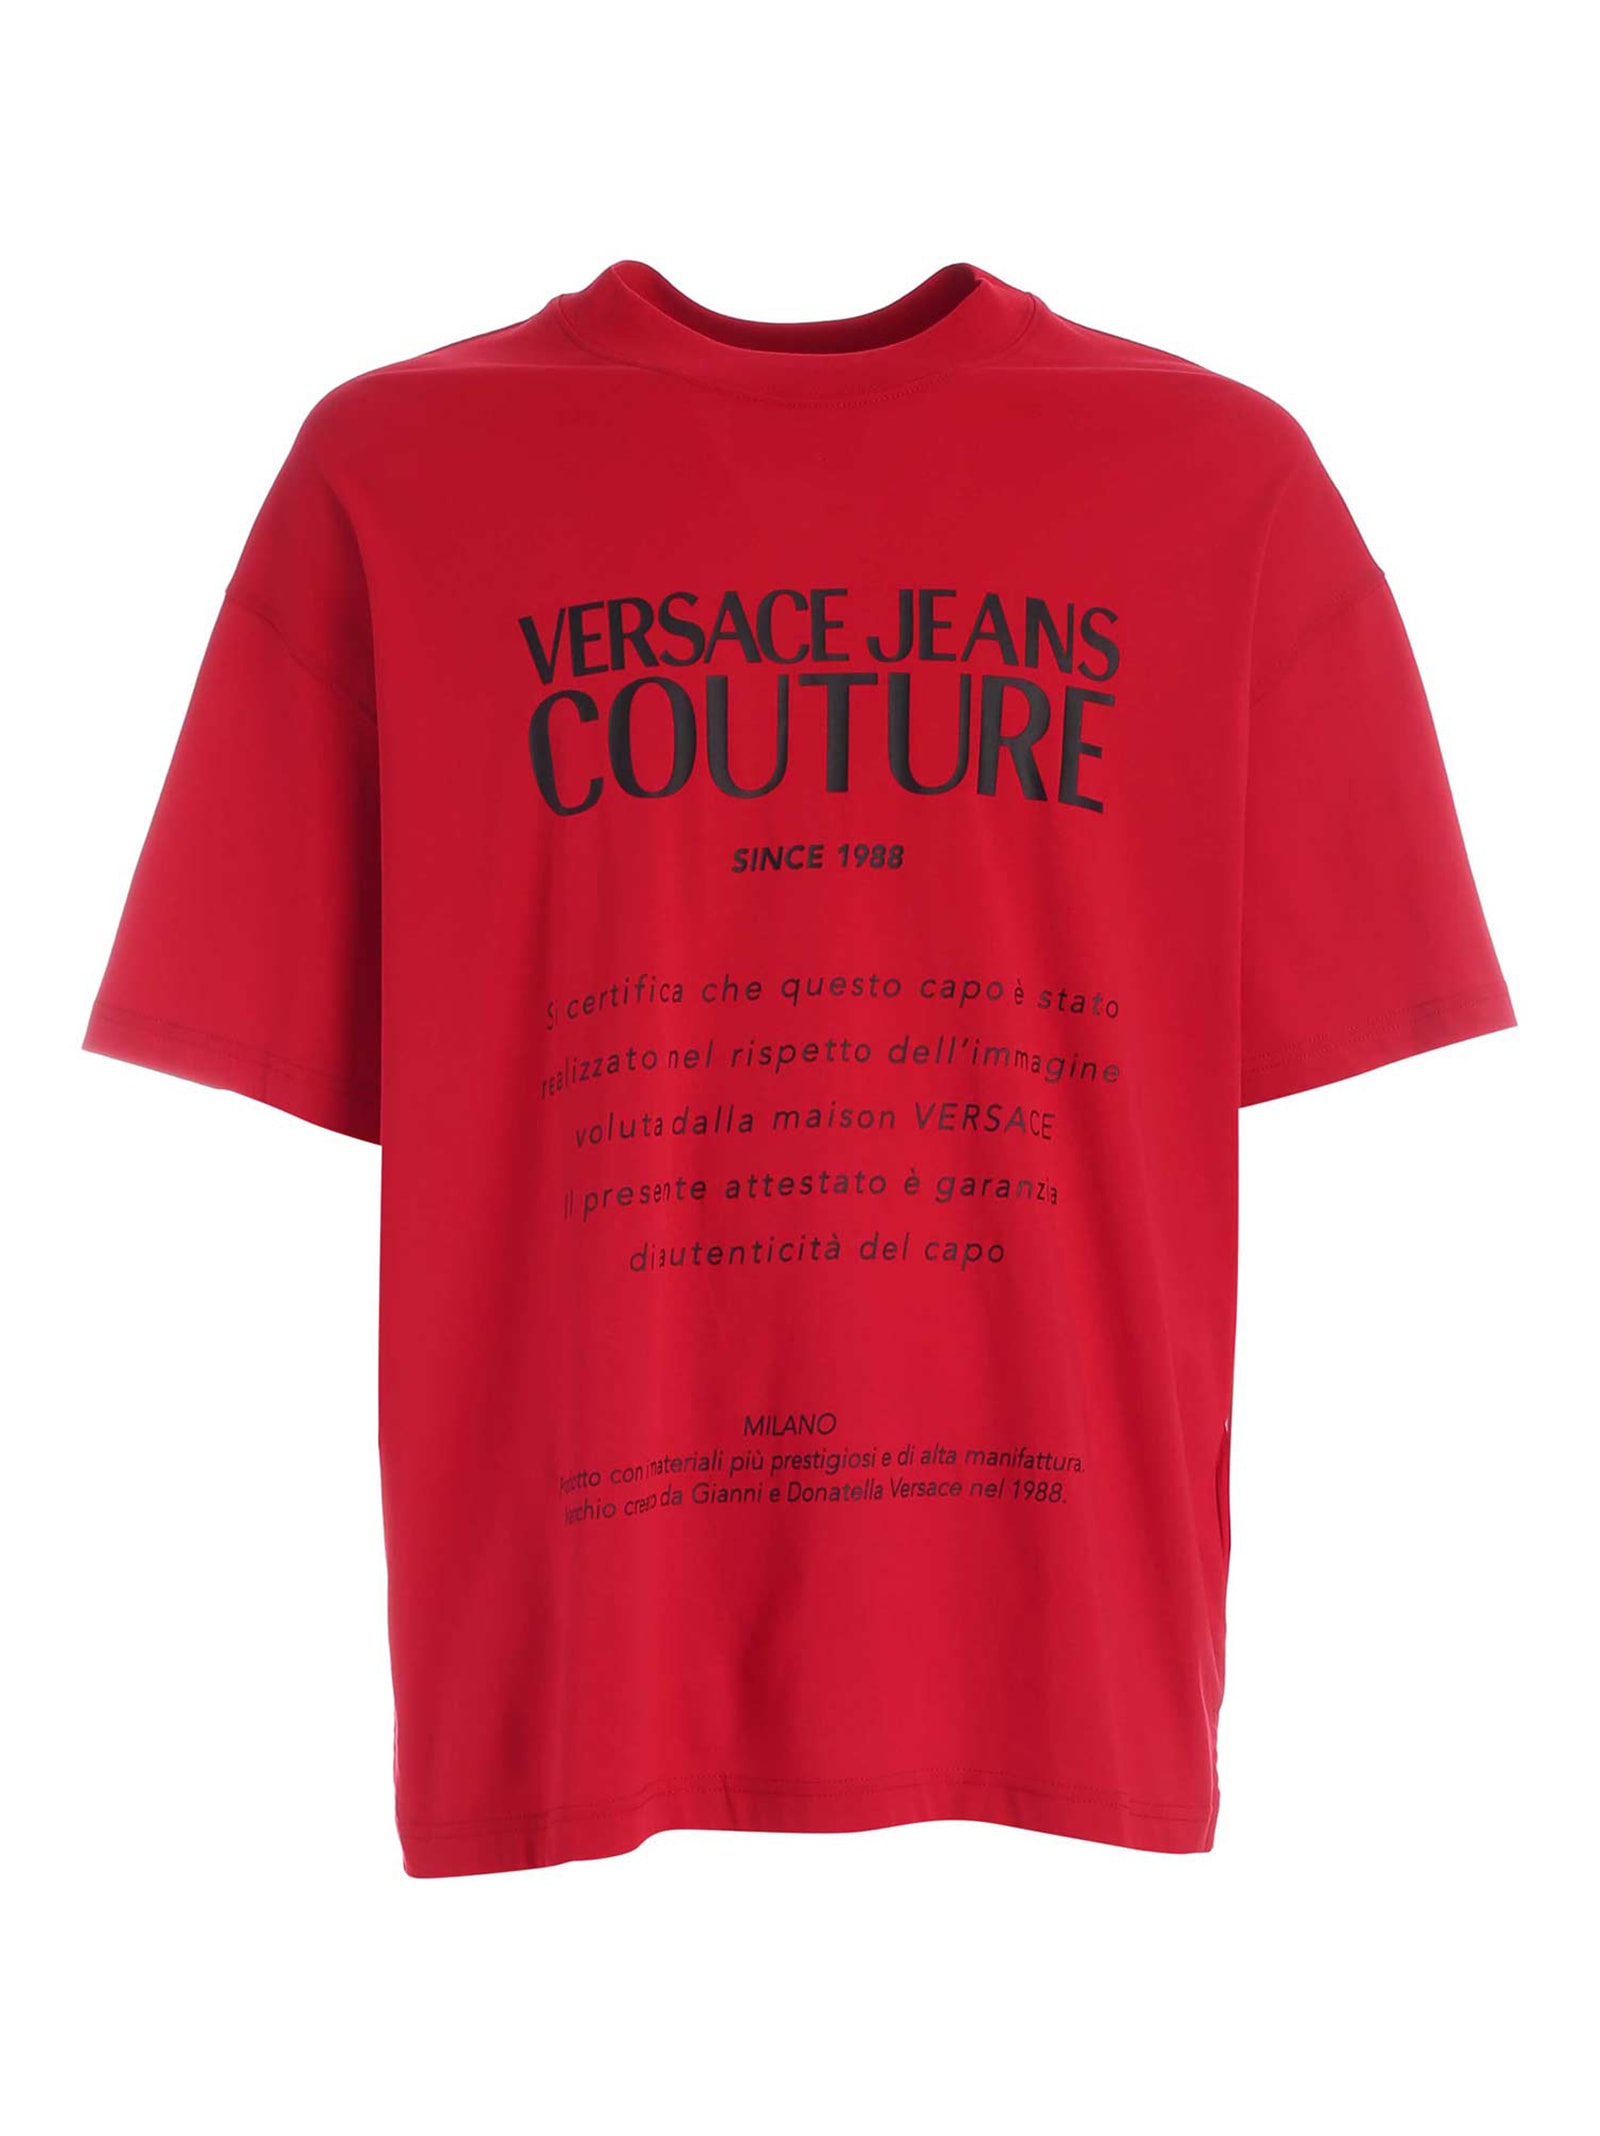 VERSACE JEANS COUTURE LABEL PRINT T-SHIRT IN RED,B3GWA7TM30319N48